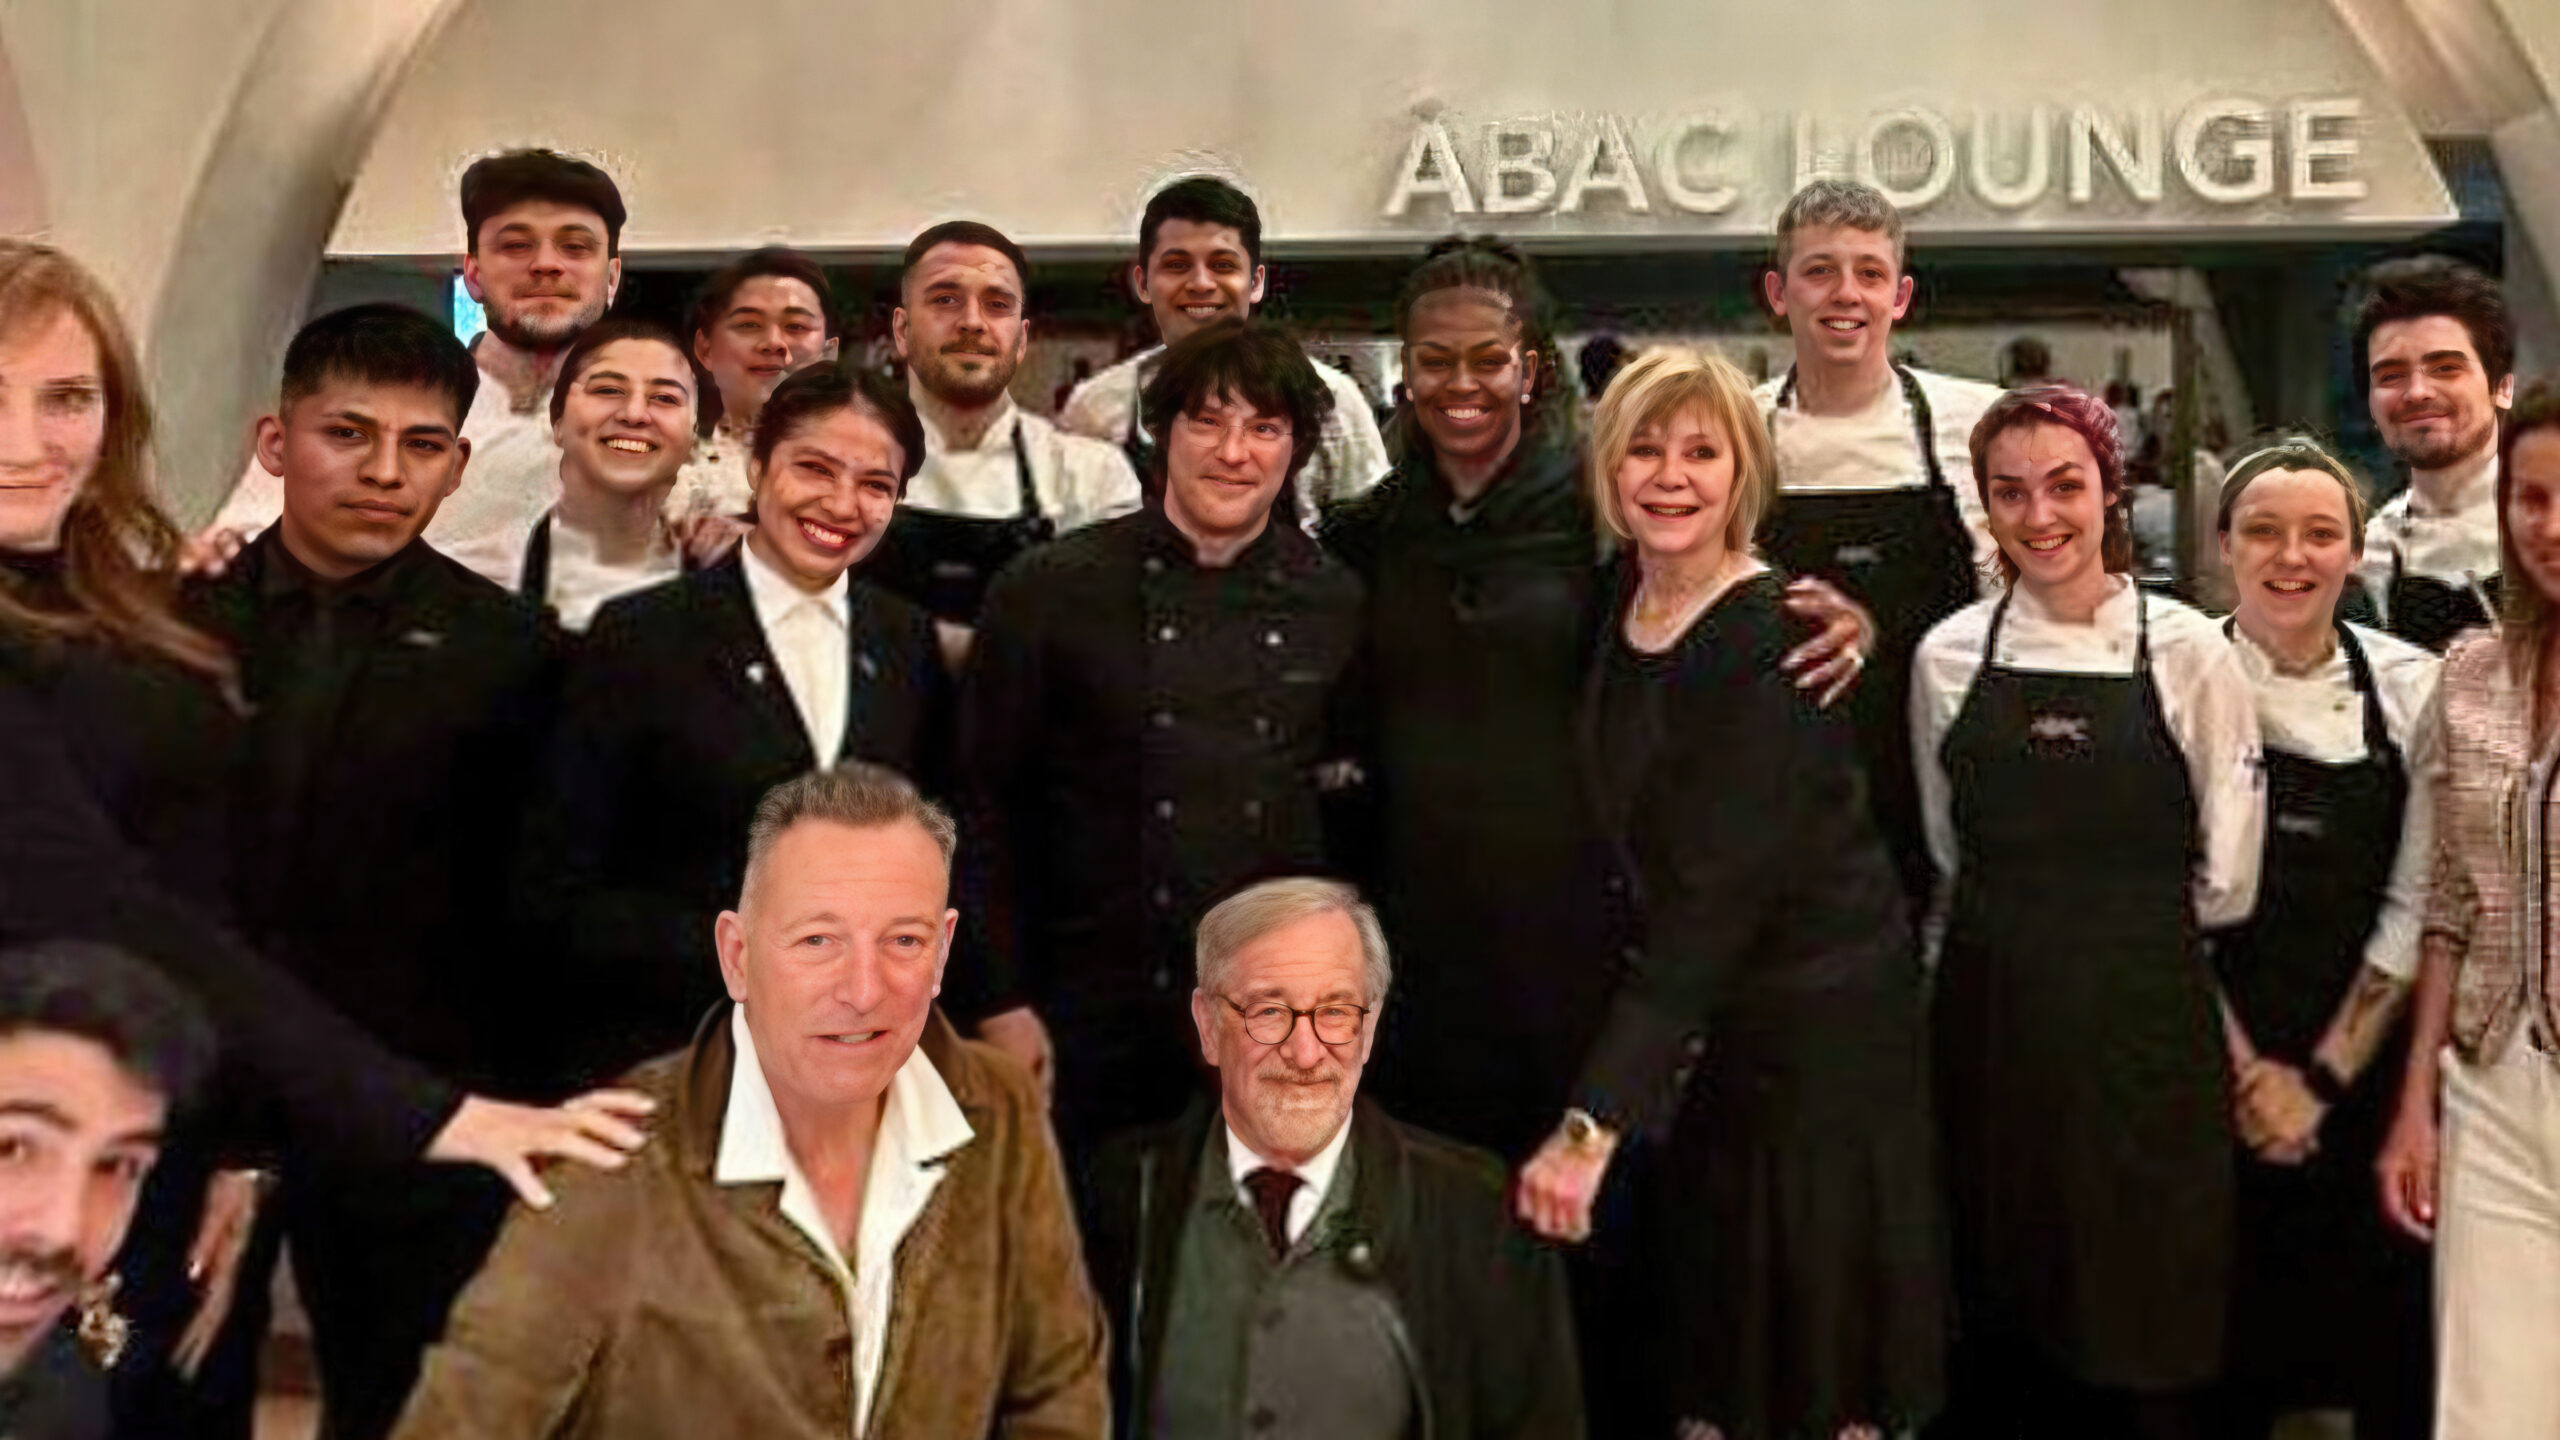 This is ABaC, Jordi Cruz’s restaurant where Bruce Springsteen, Michelle Obama and Steven Spielberg dined